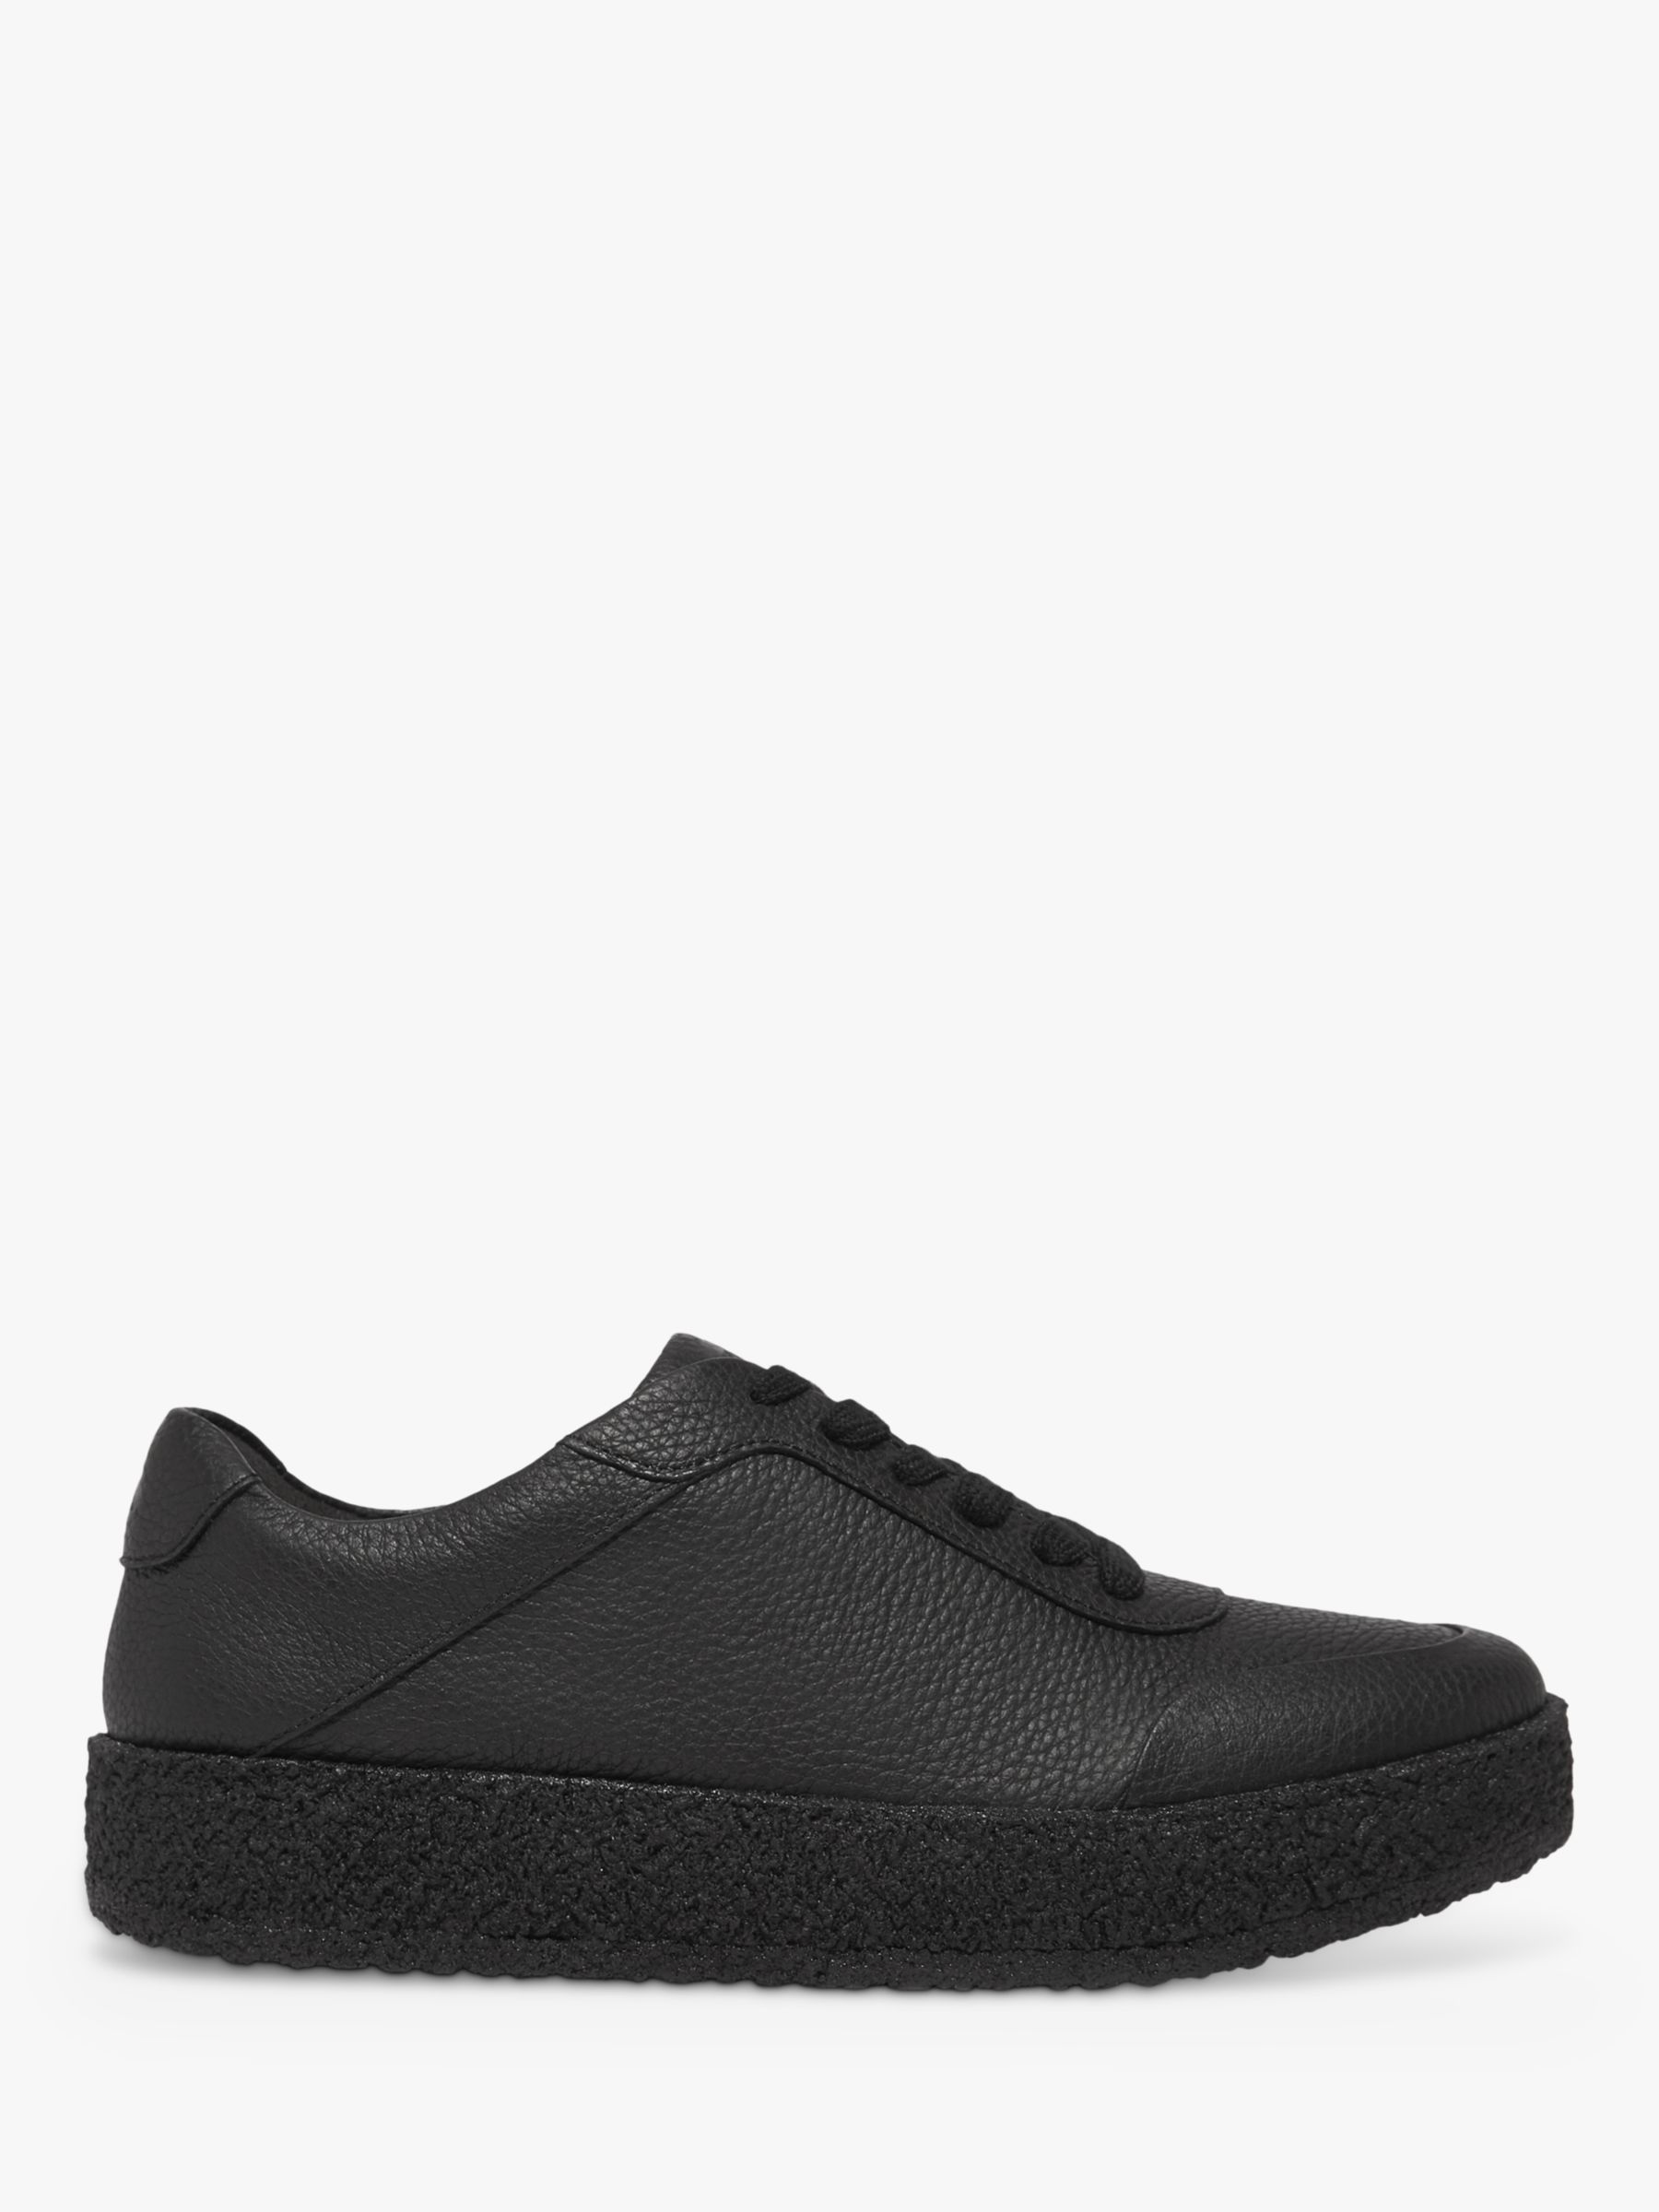 FitFlop Rally Crepe Leather Trainers, All Black at John Lewis & Partners